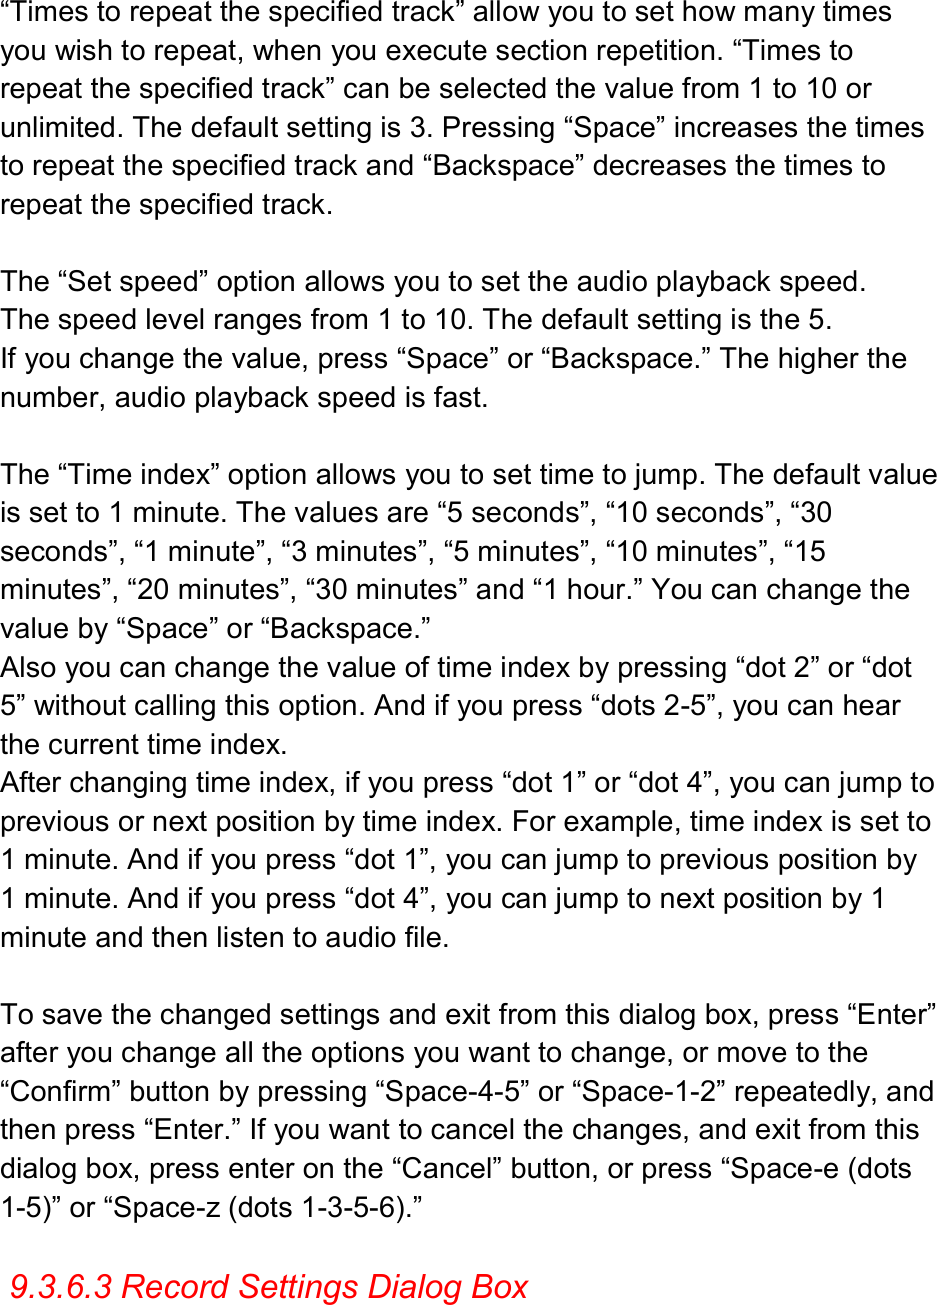  “Times to repeat the specified track” allow you to set how many times you wish to repeat, when you execute section repetition. “Times to repeat the specified track” can be selected the value from 1 to 10 or unlimited. The default setting is 3. Pressing “Space” increases the times to repeat the specified track and “Backspace” decreases the times to repeat the specified track.  The “Set speed” option allows you to set the audio playback speed. The speed level ranges from 1 to 10. The default setting is the 5. If you change the value, press “Space” or “Backspace.” The higher the number, audio playback speed is fast.  The “Time index” option allows you to set time to jump. The default value is set to 1 minute. The values are “5 seconds”, “10 seconds”, “30 seconds”, “1 minute”, “3 minutes”, “5 minutes”, “10 minutes”, “15 minutes”, “20 minutes”, “30 minutes” and “1 hour.” You can change the value by “Space” or “Backspace.”   Also you can change the value of time index by pressing “dot 2” or “dot 5” without calling this option. And if you press “dots 2-5”, you can hear the current time index. After changing time index, if you press “dot 1” or “dot 4”, you can jump to previous or next position by time index. For example, time index is set to 1 minute. And if you press “dot 1”, you can jump to previous position by 1 minute. And if you press “dot 4”, you can jump to next position by 1 minute and then listen to audio file.  To save the changed settings and exit from this dialog box, press “Enter” after you change all the options you want to change, or move to the “Confirm” button by pressing “Space-4-5” or “Space-1-2” repeatedly, and then press “Enter.” If you want to cancel the changes, and exit from this dialog box, press enter on the “Cancel” button, or press “Space-e (dots 1-5)” or “Space-z (dots 1-3-5-6).”  9.3.6.3 Record Settings Dialog Box  